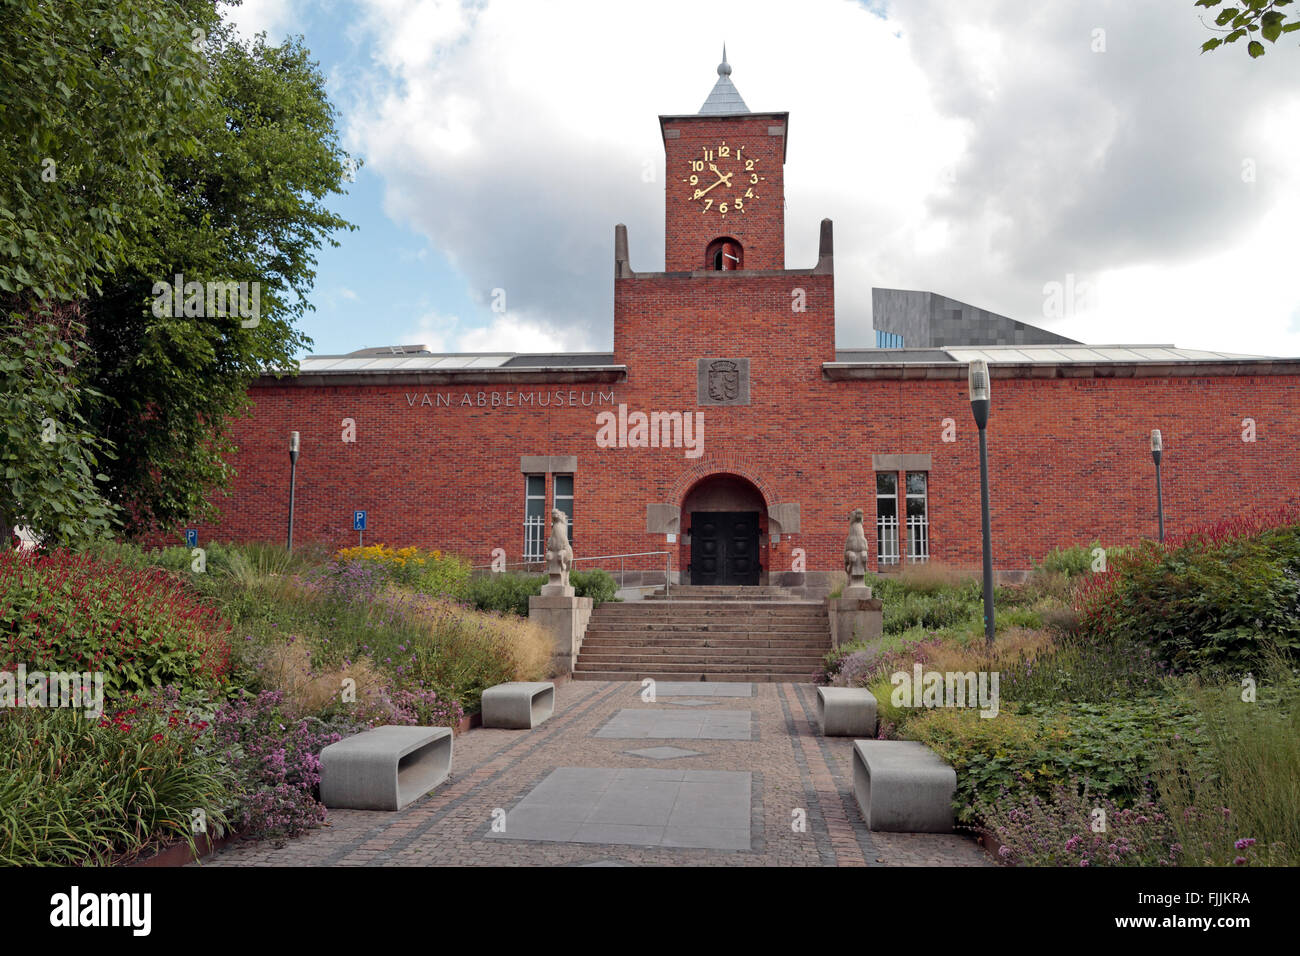 The old wing of the Van Abbe Museum in Eindhoven, Noord-Brabant, Netherlands. Stock Photo